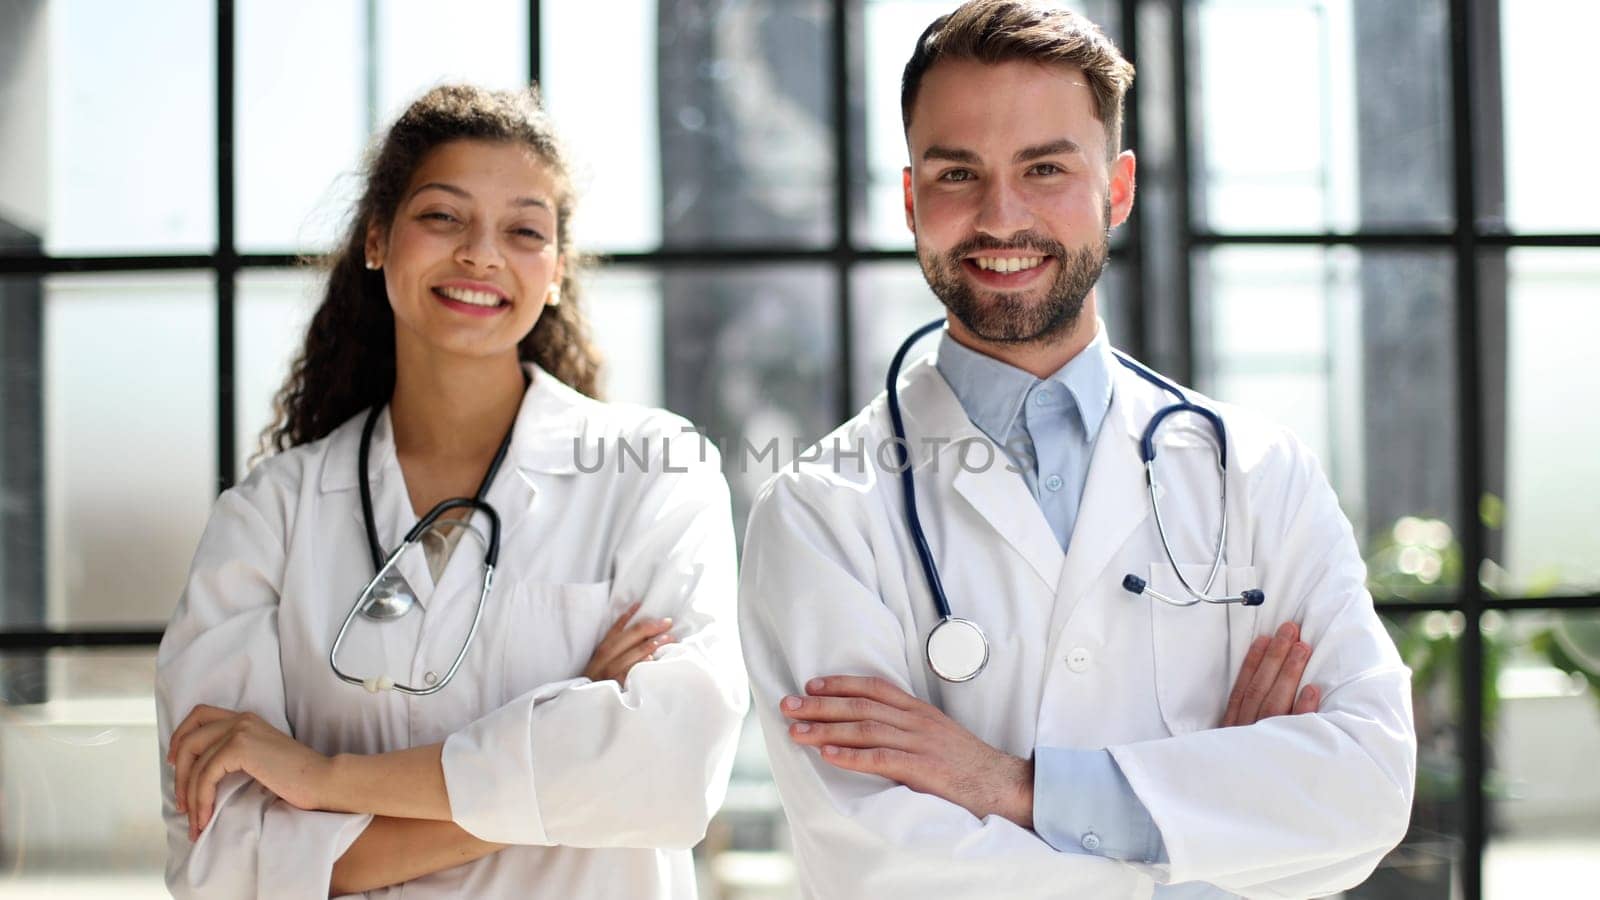 female doctor and male doctor stand in the lobby of the hospital